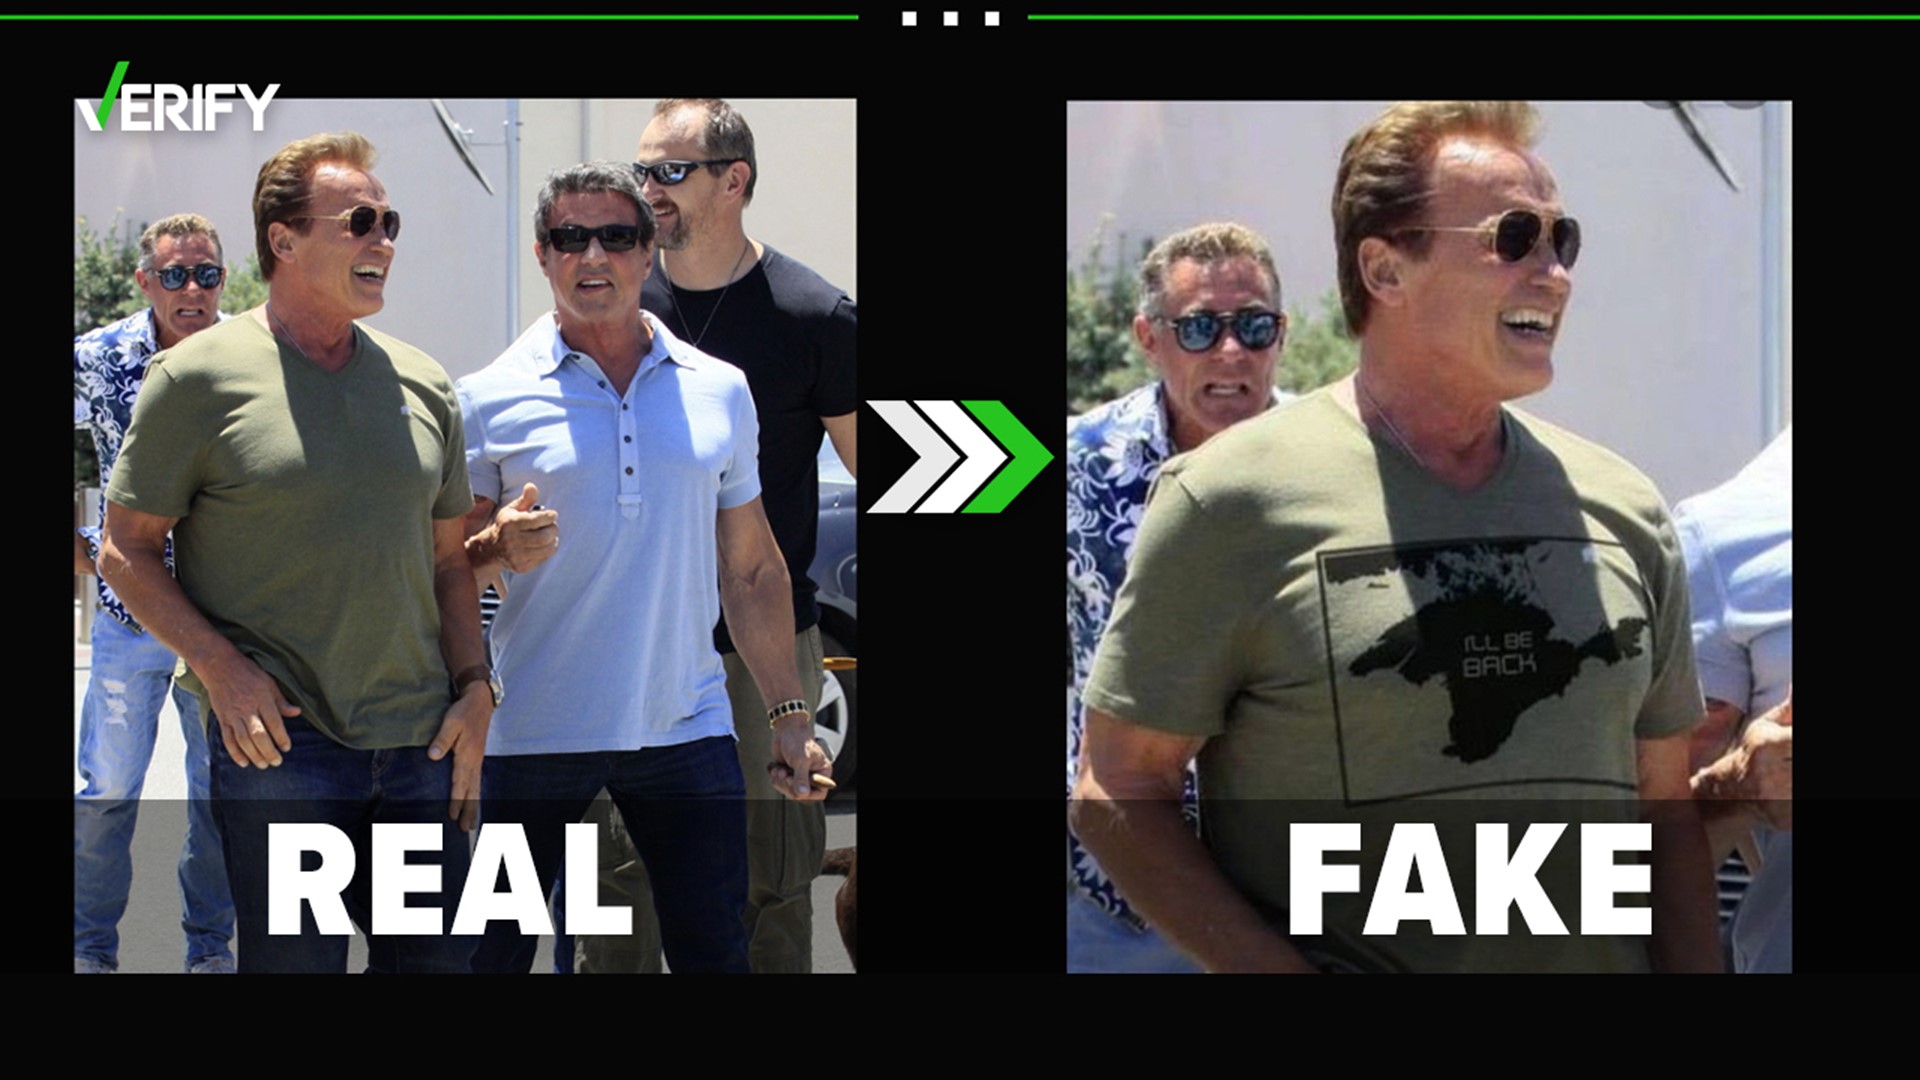 A viral image appearing to show Arnold Schwarzenegger wearing a pro-Ukraine shirt that says “I’ll be back” is fake.